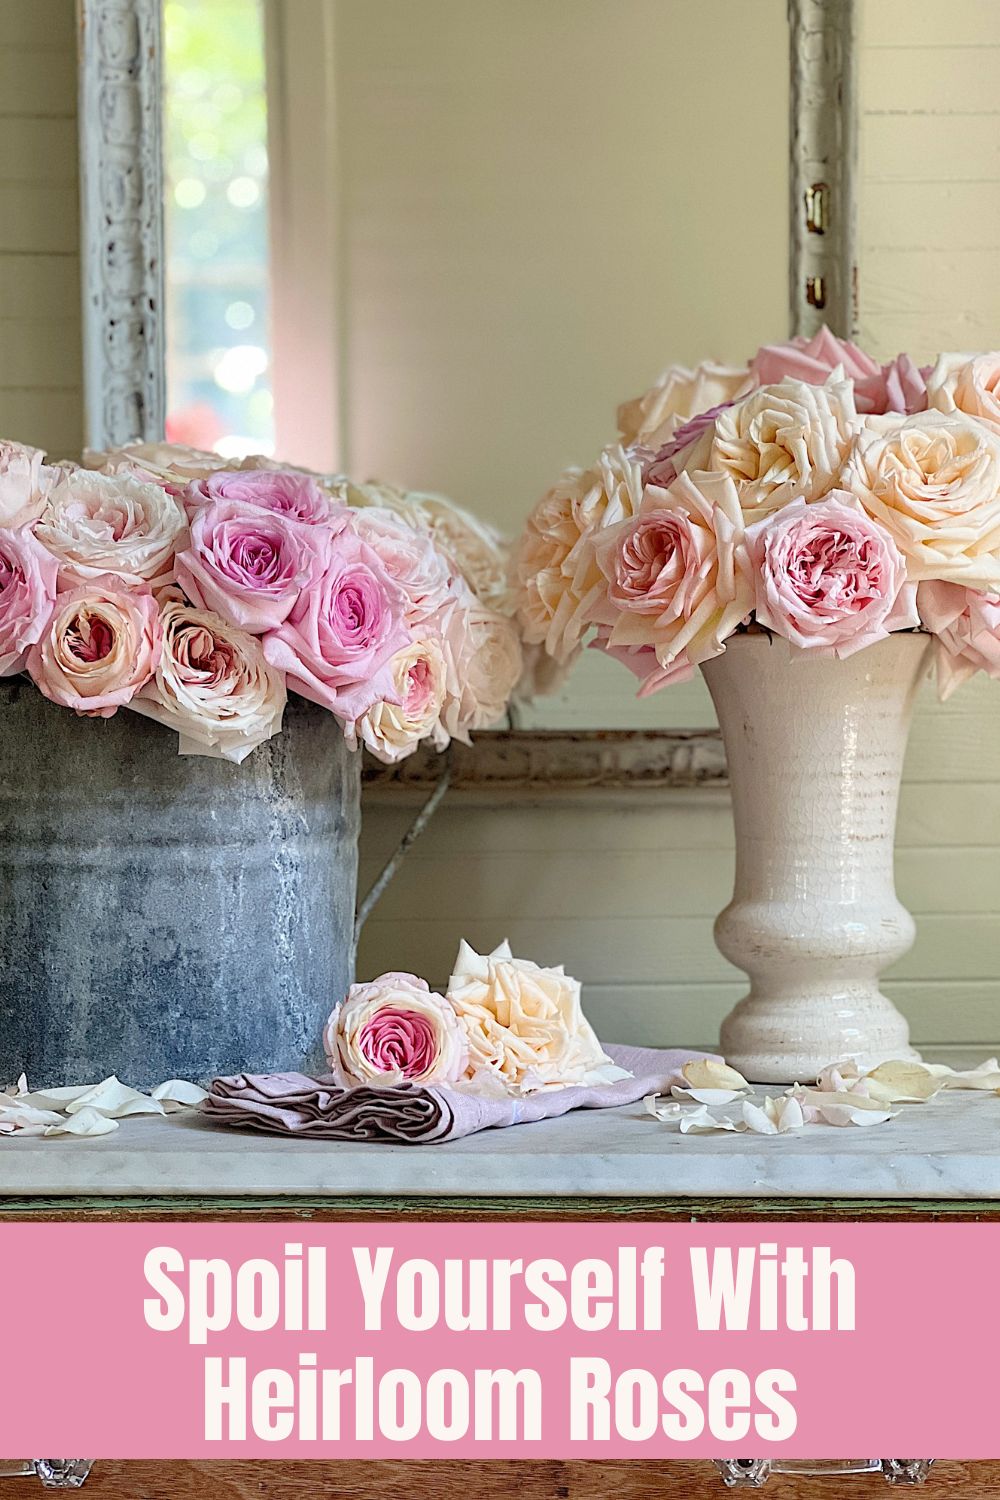 Heirloom roses are my absolute favorite. Grace Rose Farm heirloom roses are beyond gorgeous and their scent is heavenly!